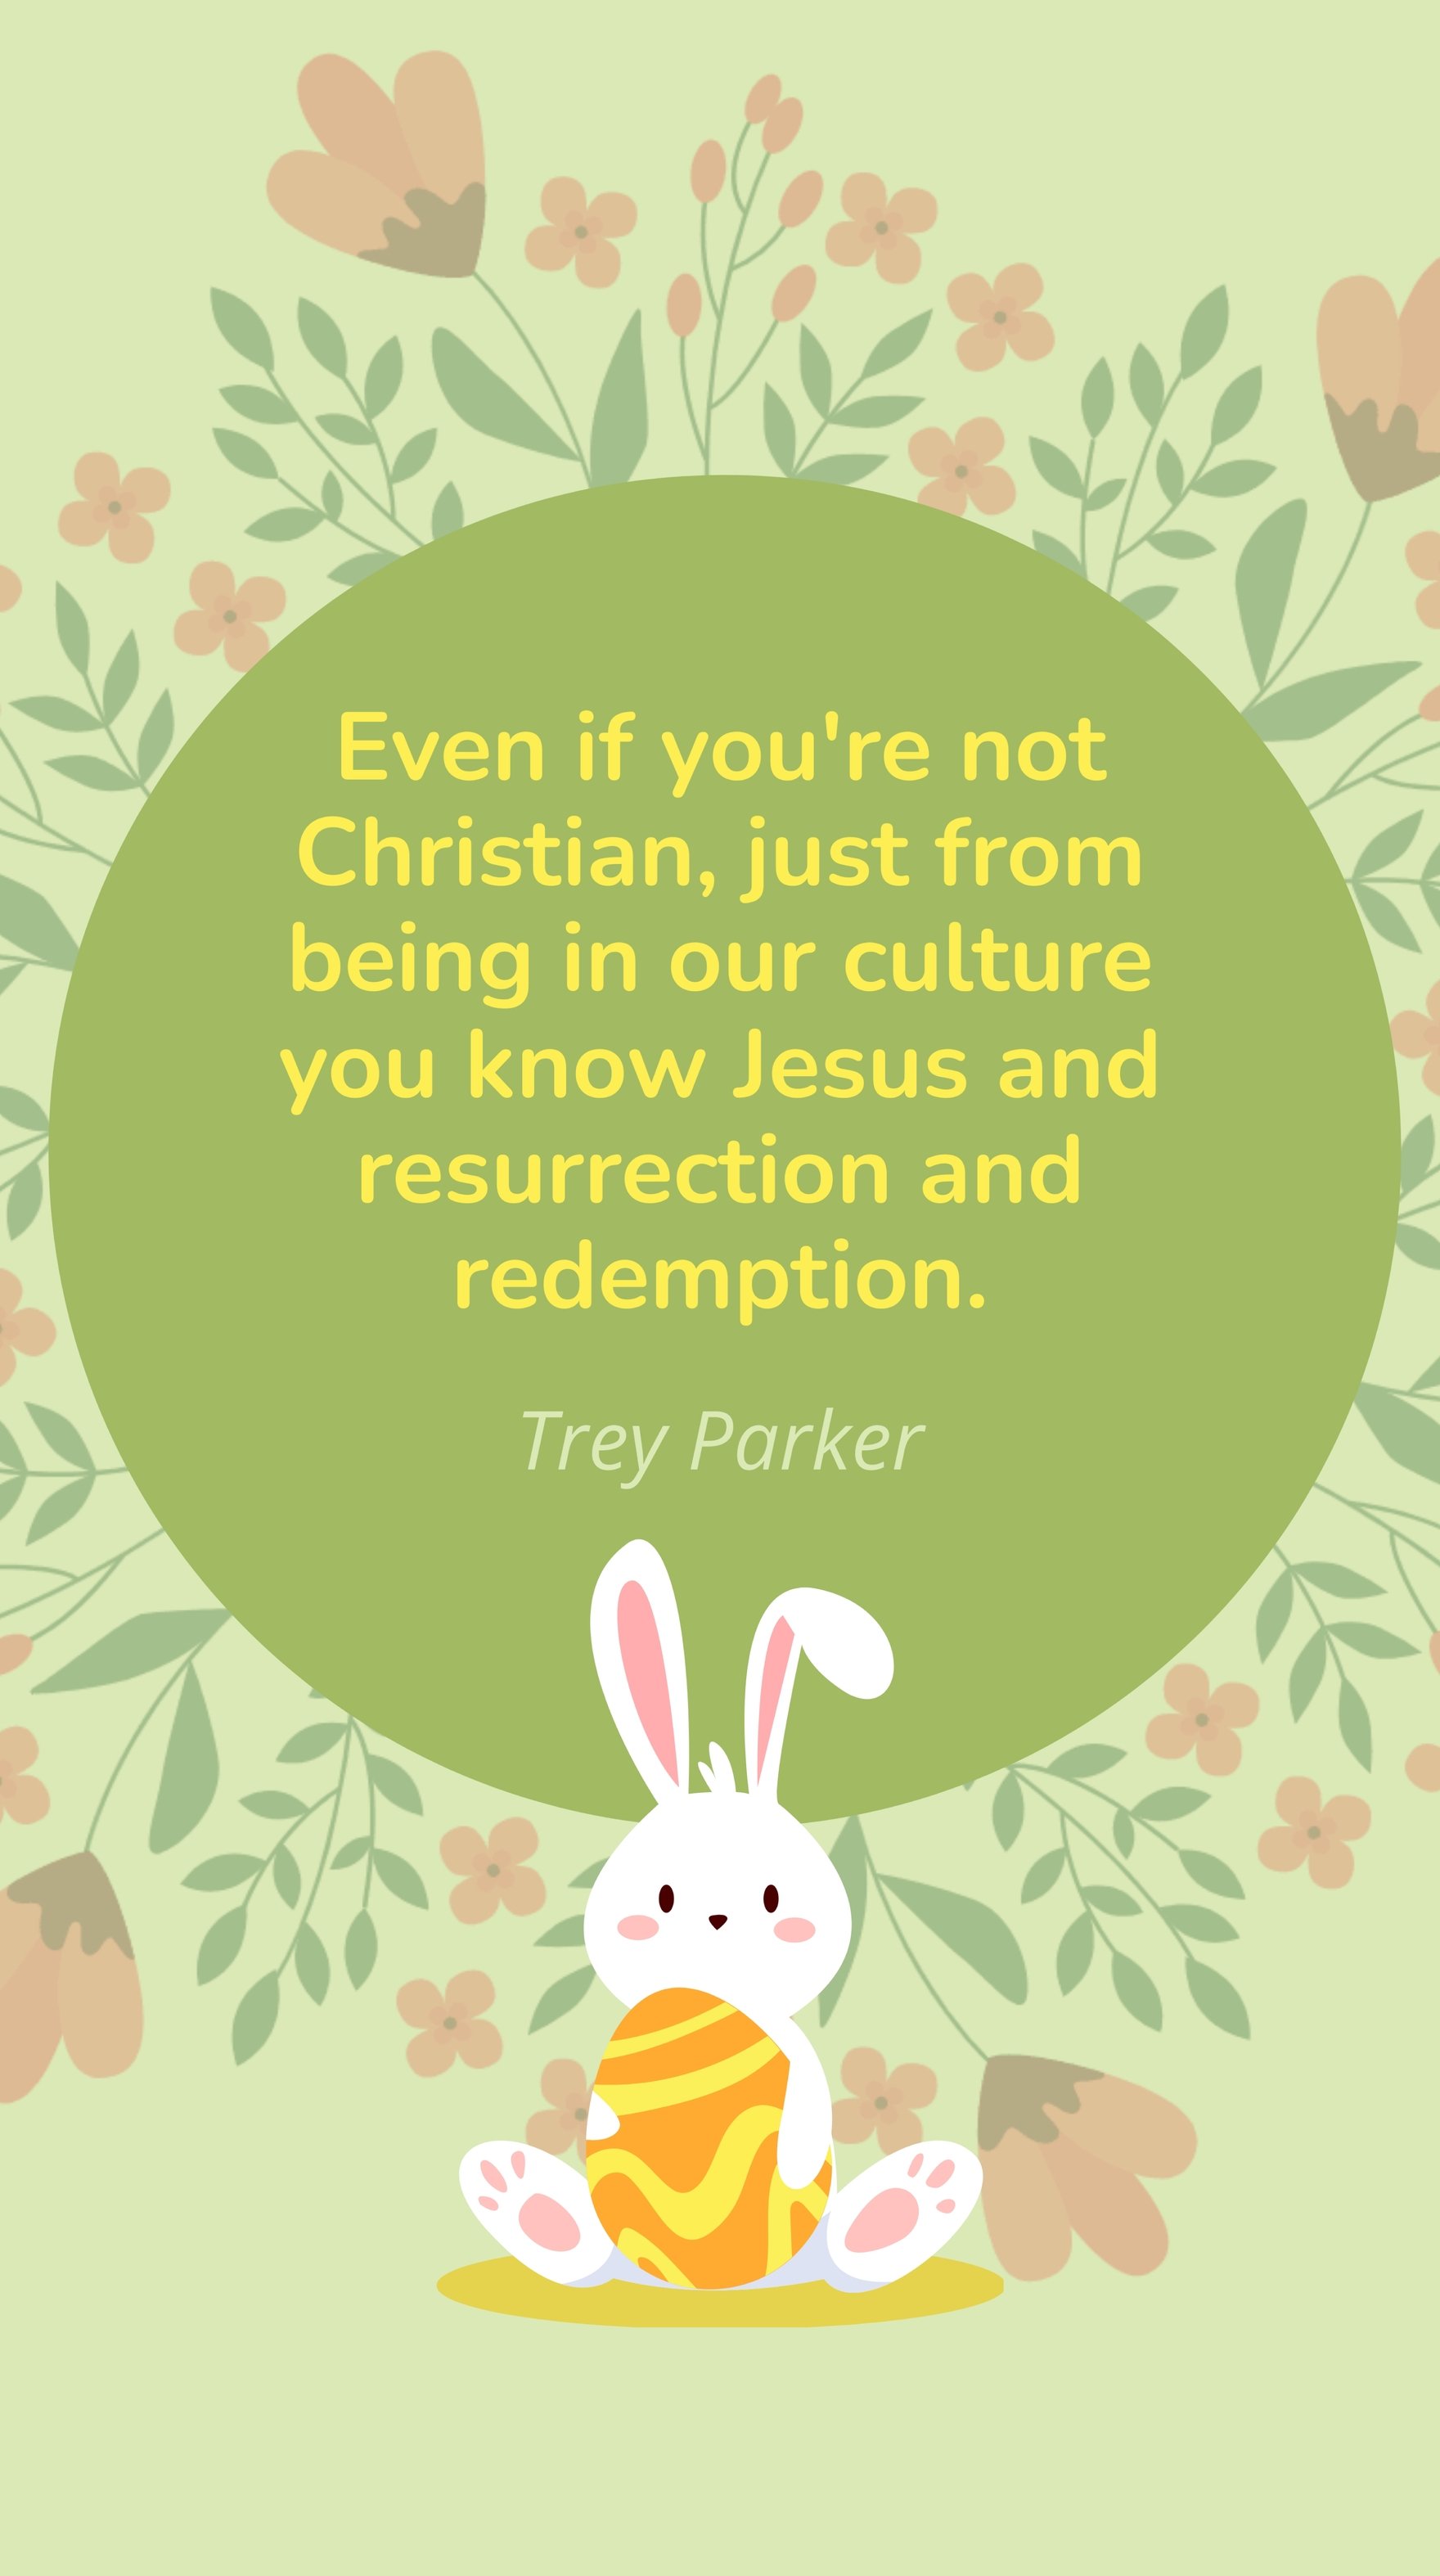 Trey Parker - Even if you're not Christian, just from being in our culture you know Jesus and resurrection and redemption.